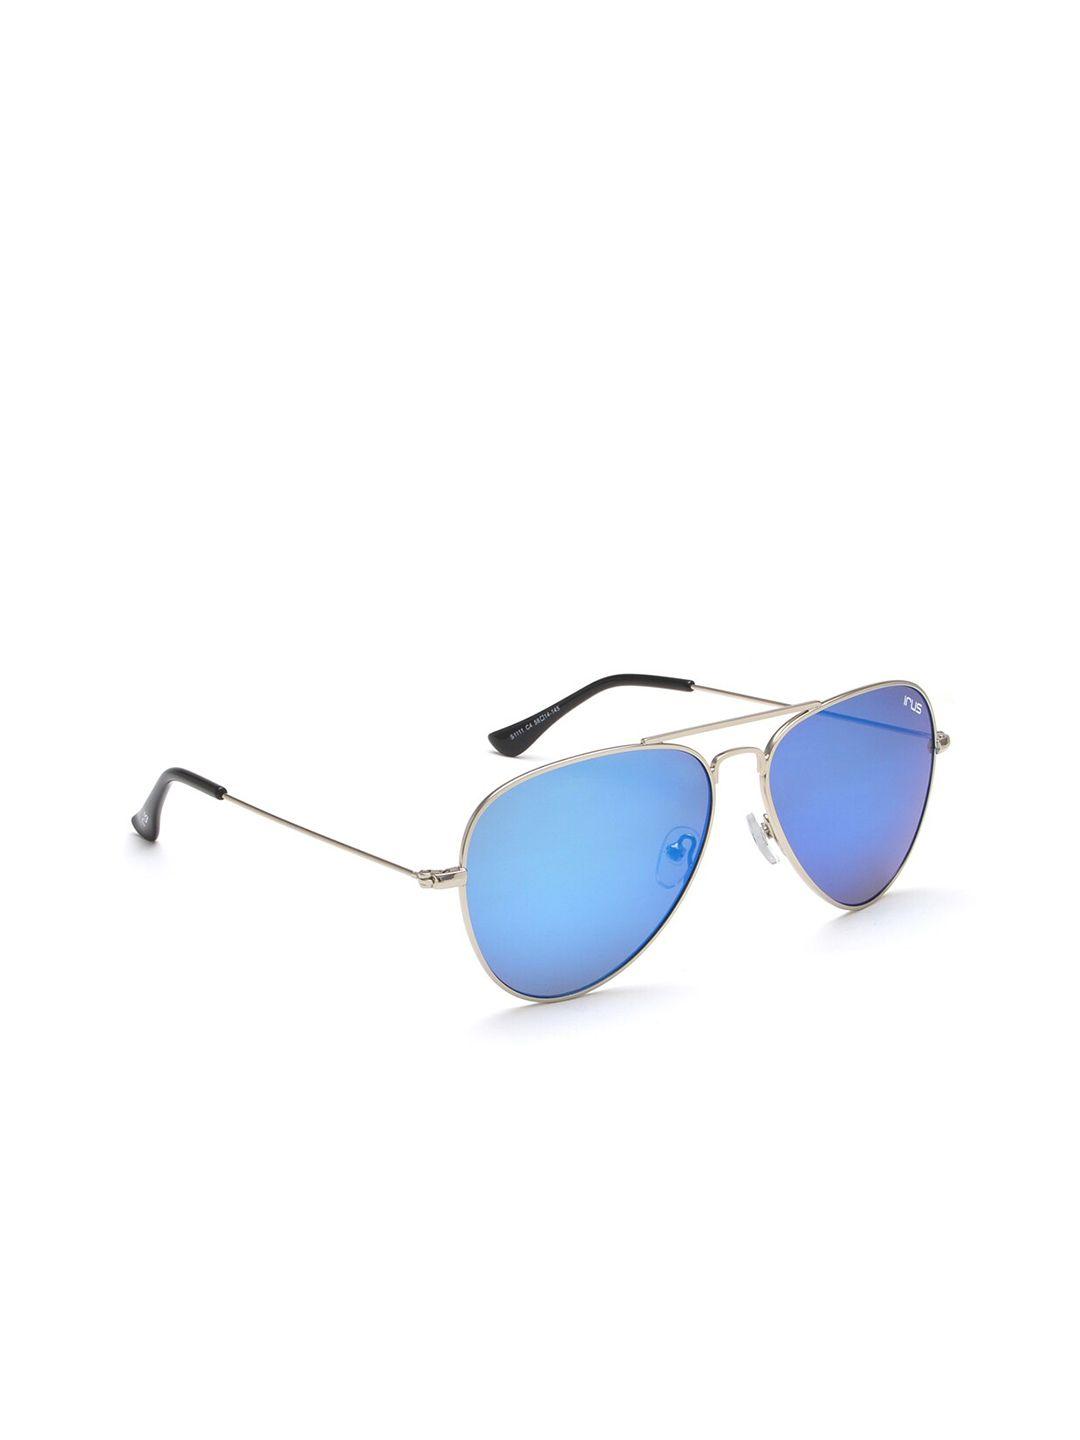 irus by idee unisex blue lens & silver-toned aviator sunglasses with uv protected lens